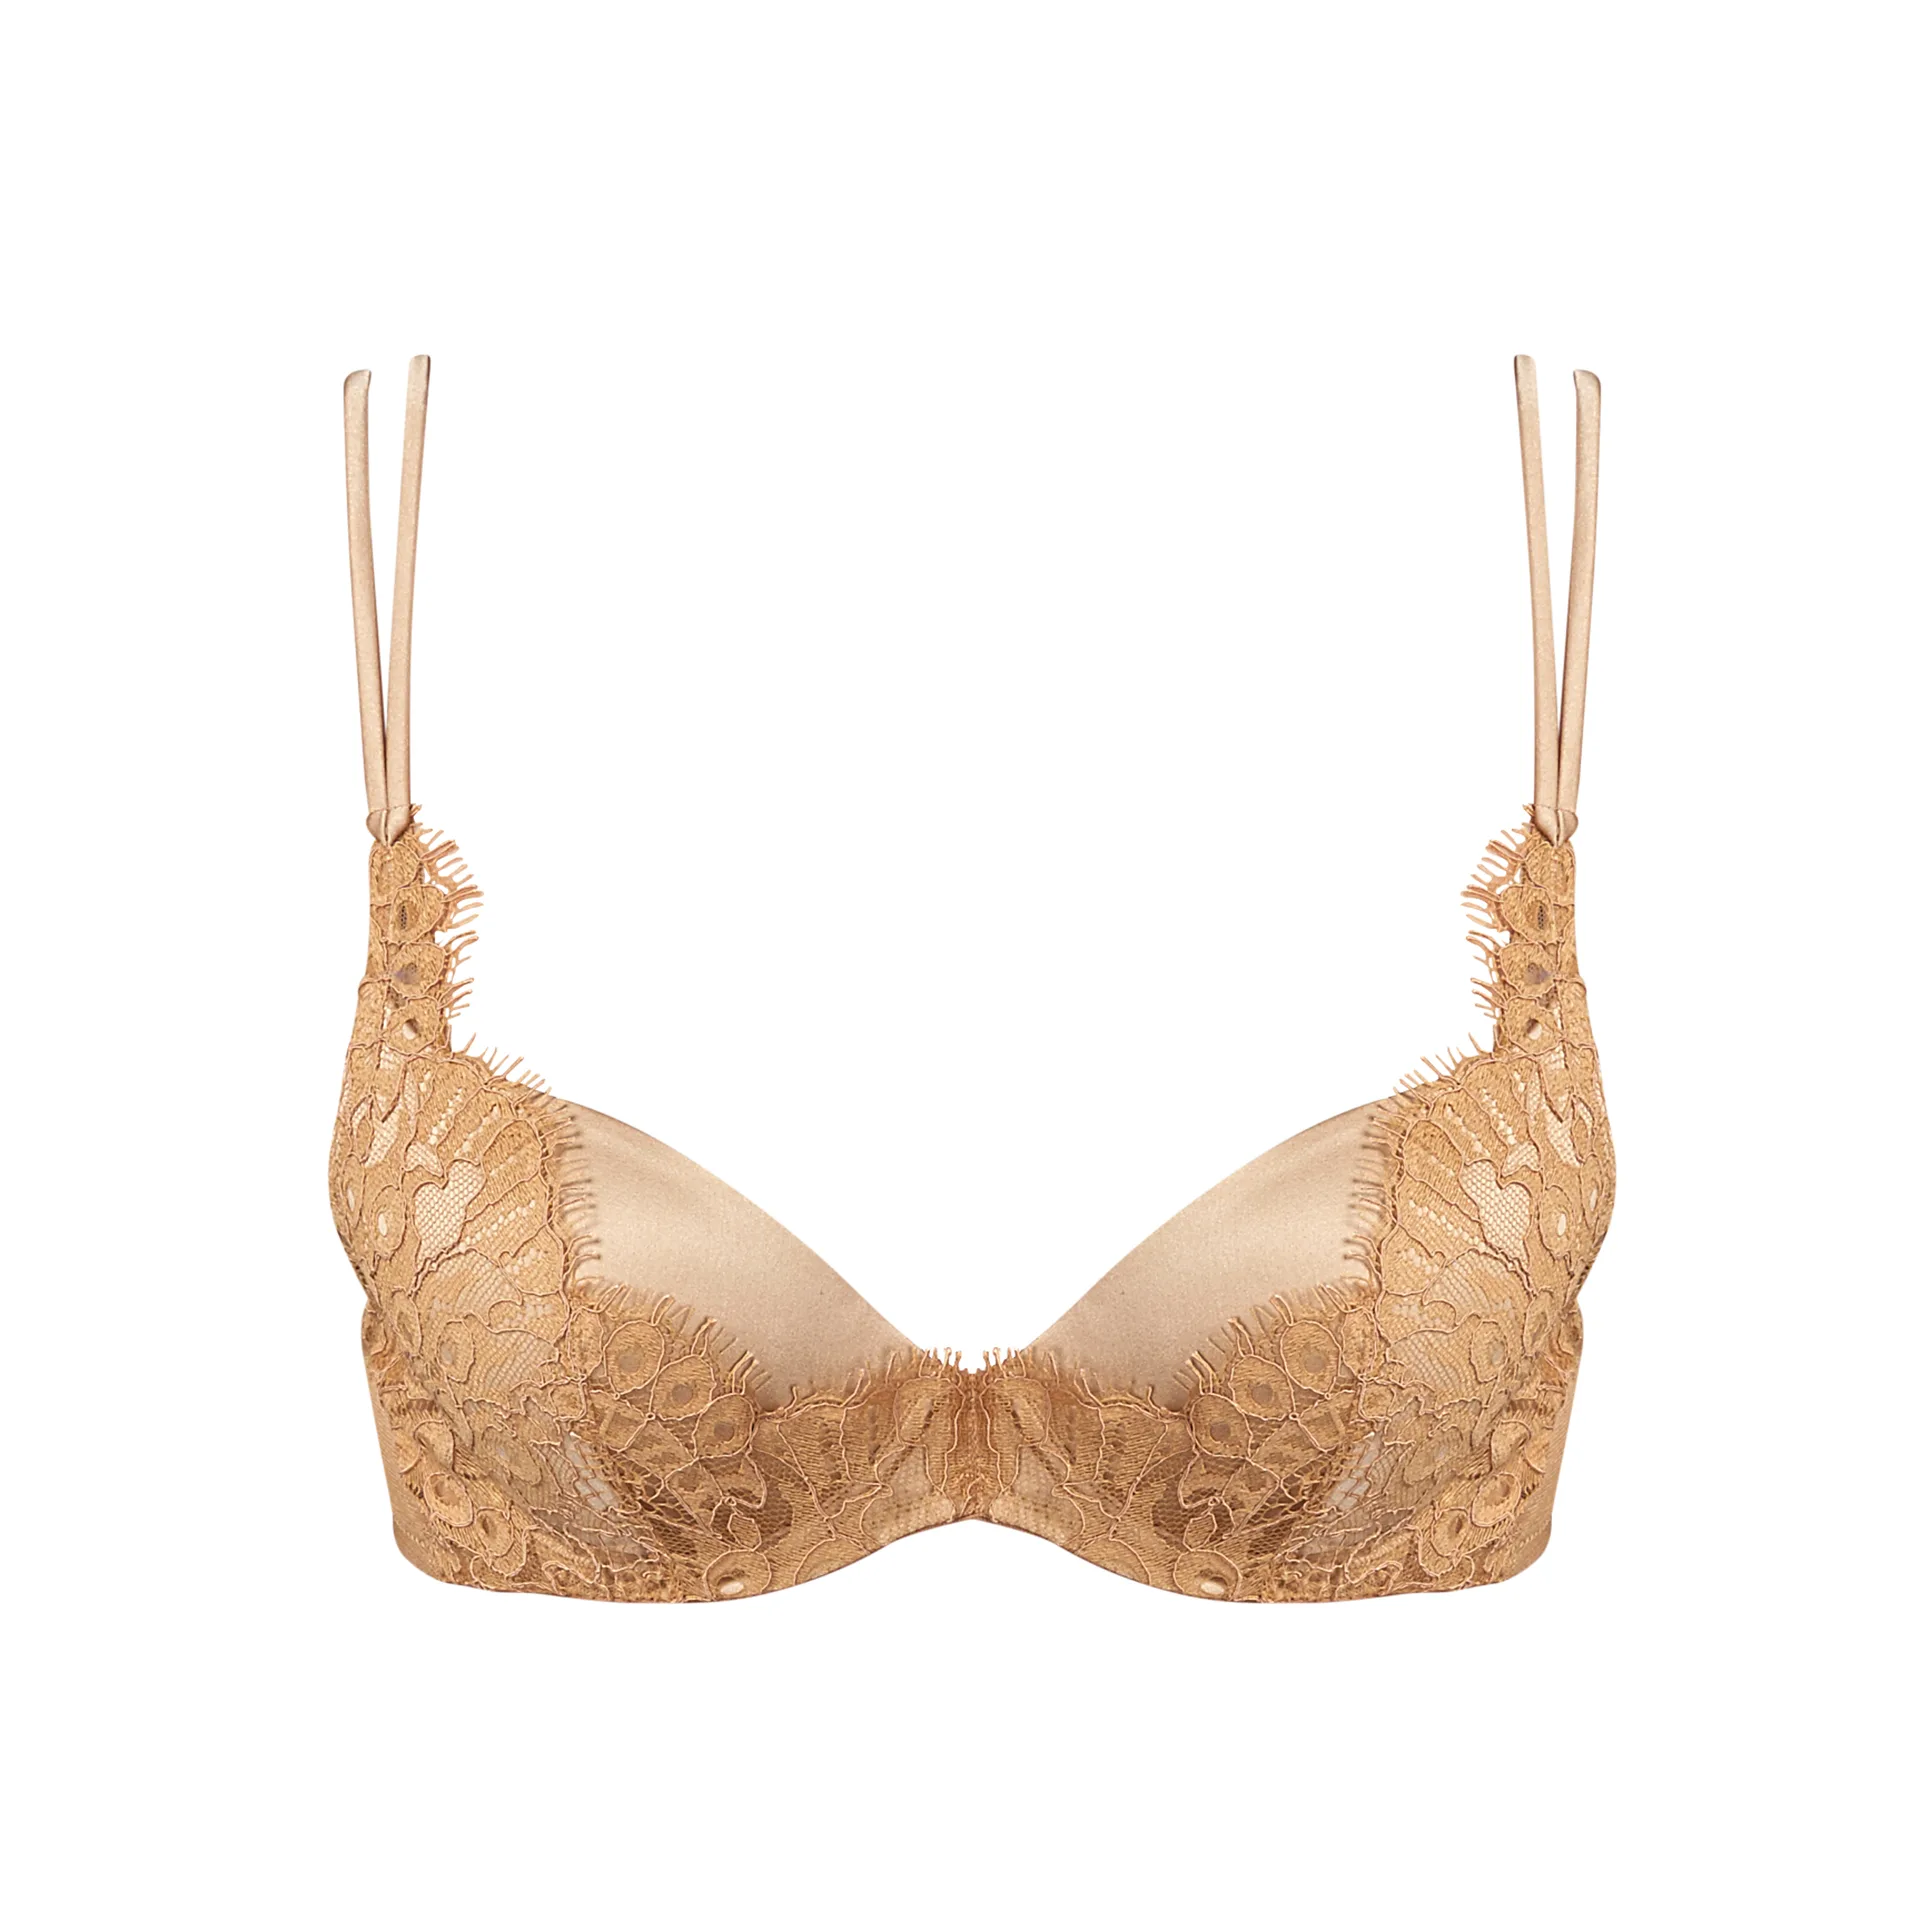 Andres Sarda TYNG push-up bra removable pads in white